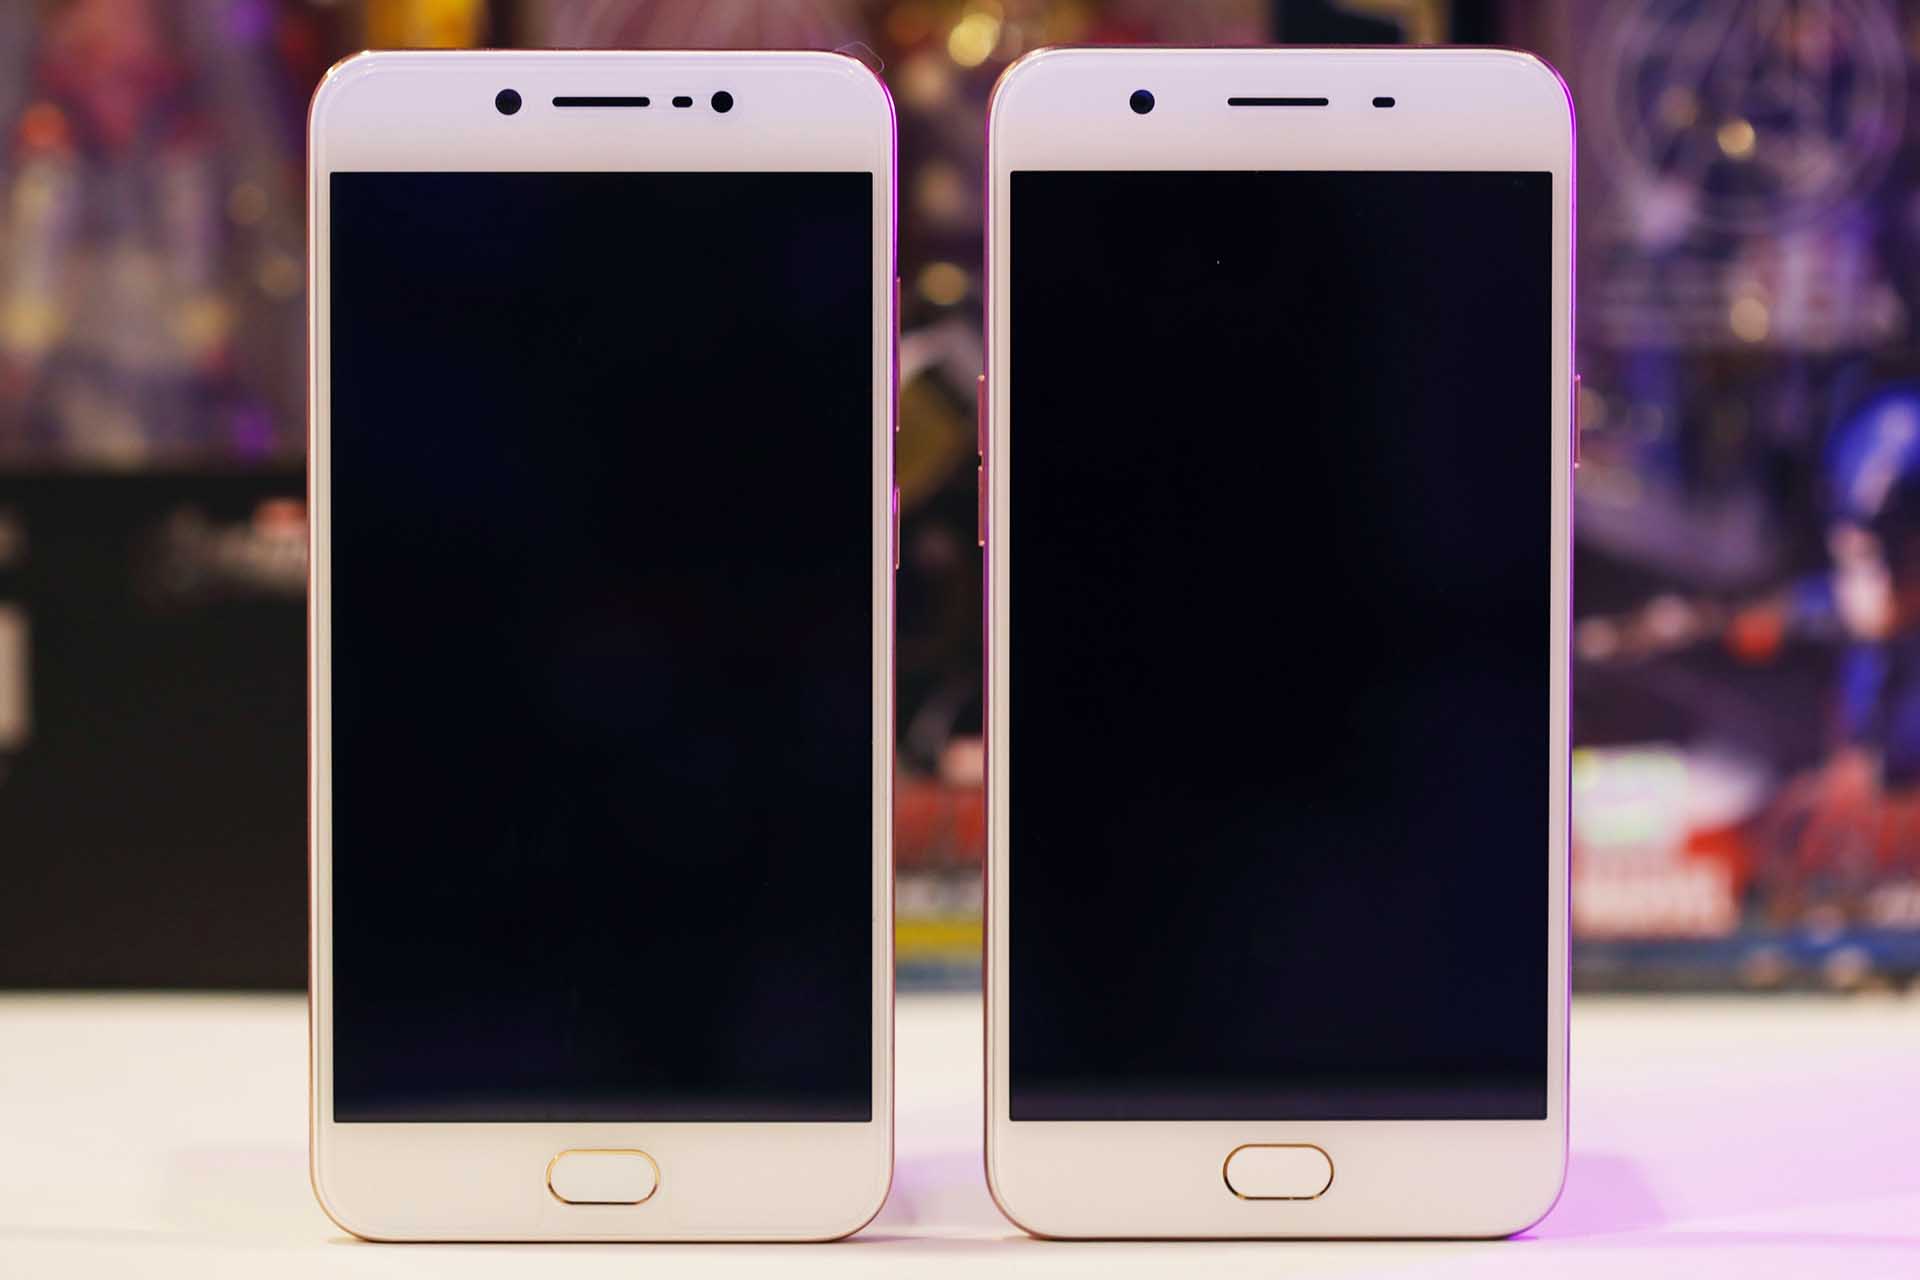 Which is which? Can you guess? The Vivo V5 is on the left side.